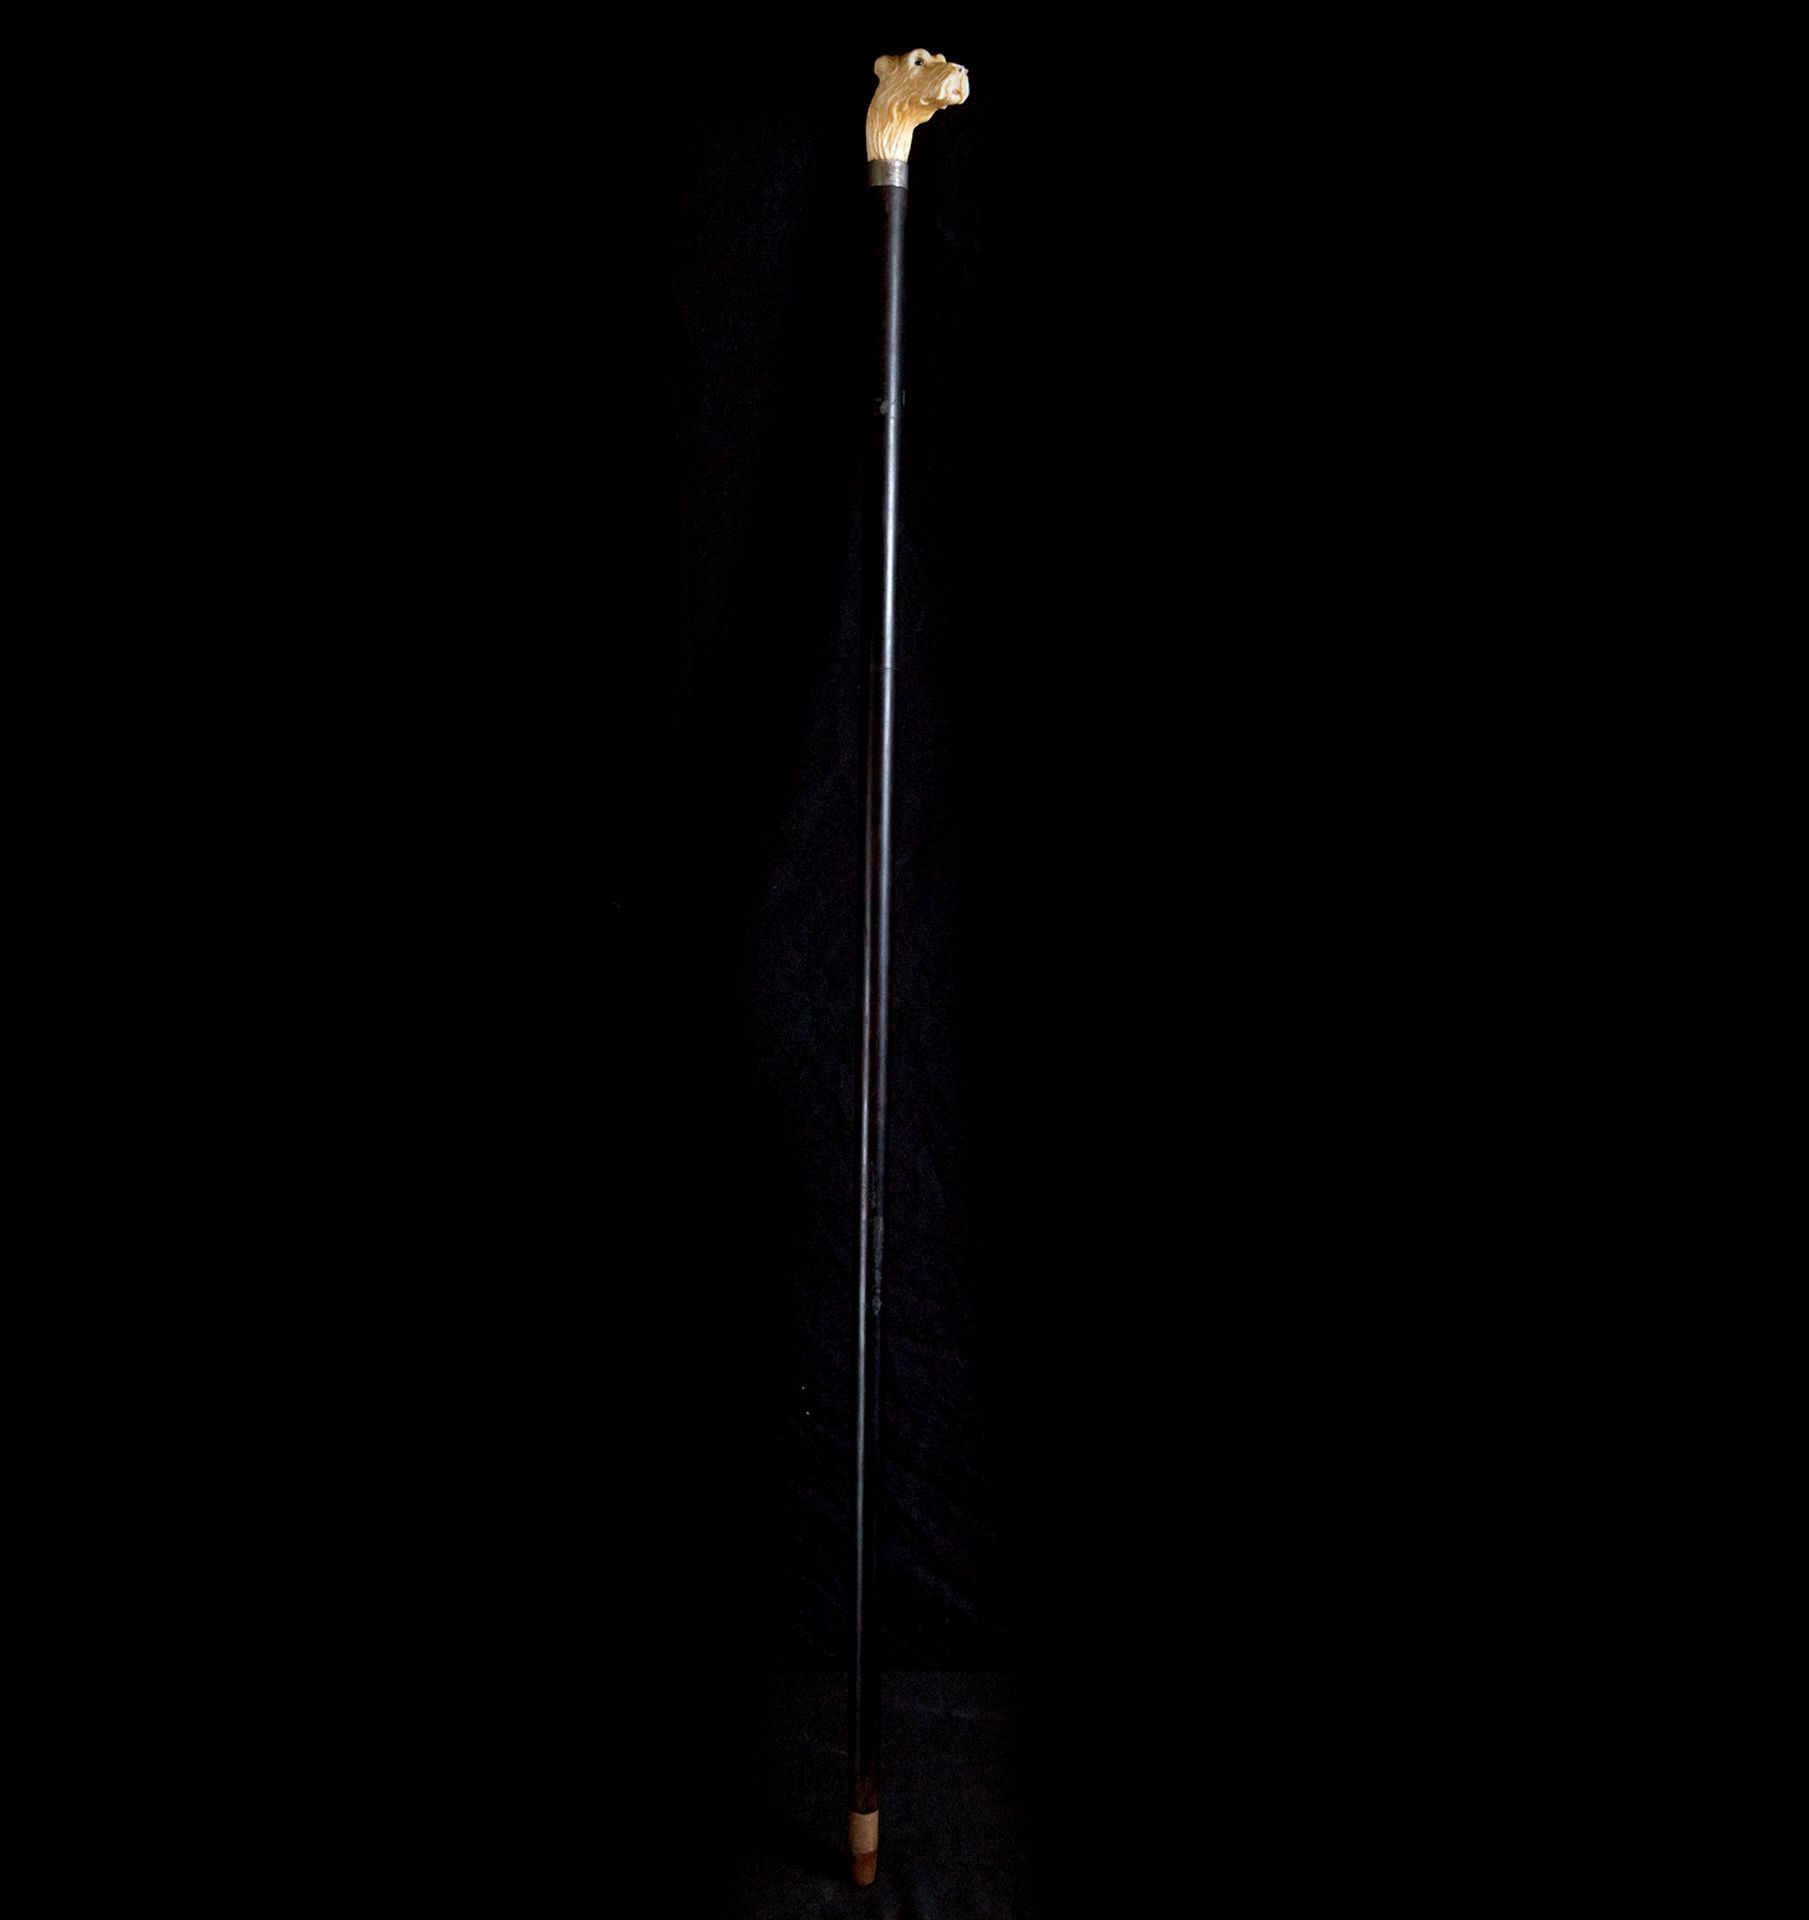 Victorian Walking Cane with Carved Dog's Head in Antler and Fan Body, England, 19th Century - Image 2 of 4